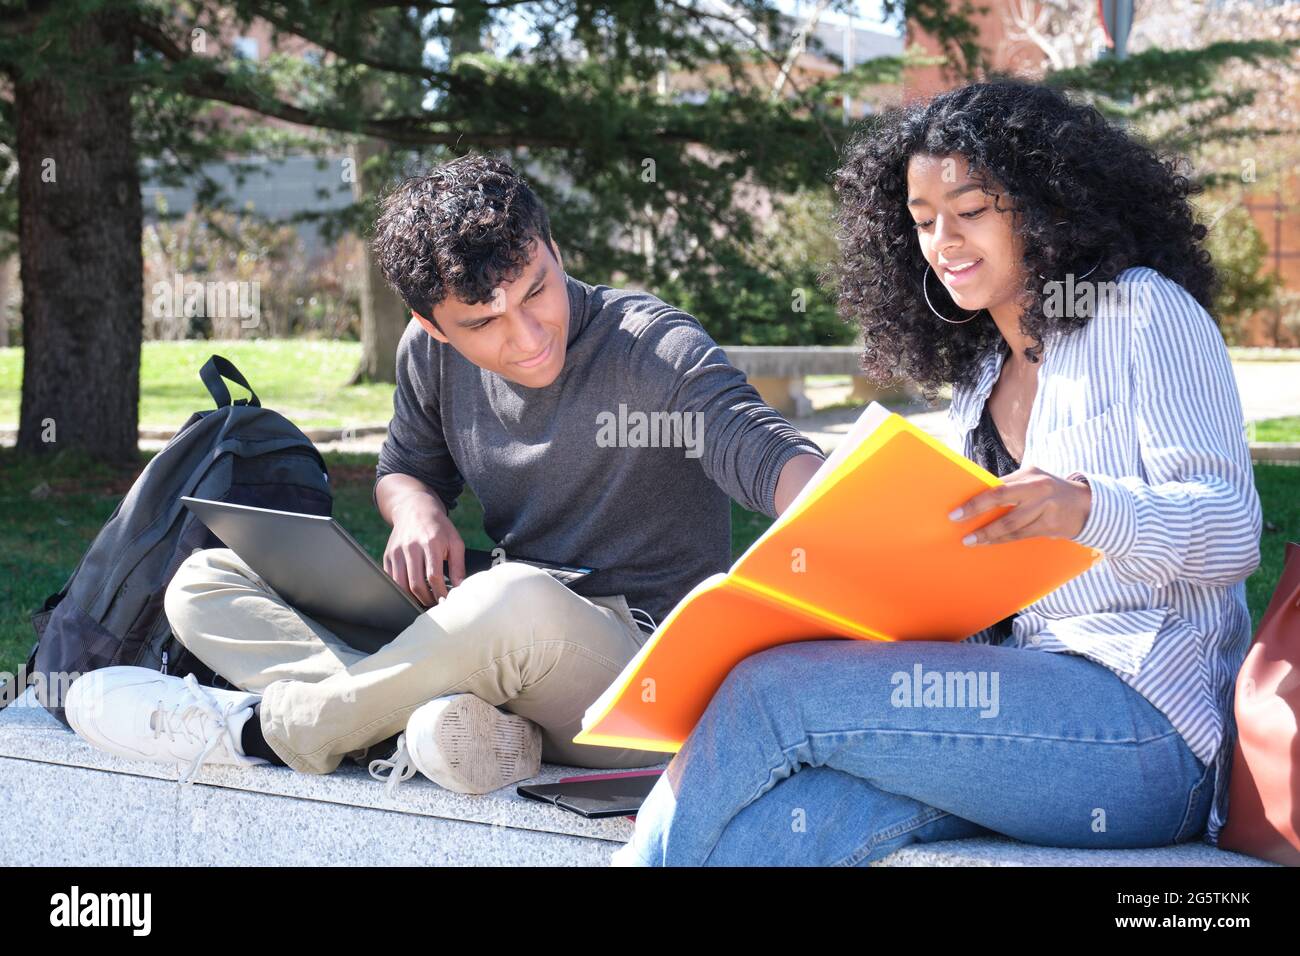 Two latin students studying from their lecture notes sitting on a wall outdoors. University life at campus. Stock Photo